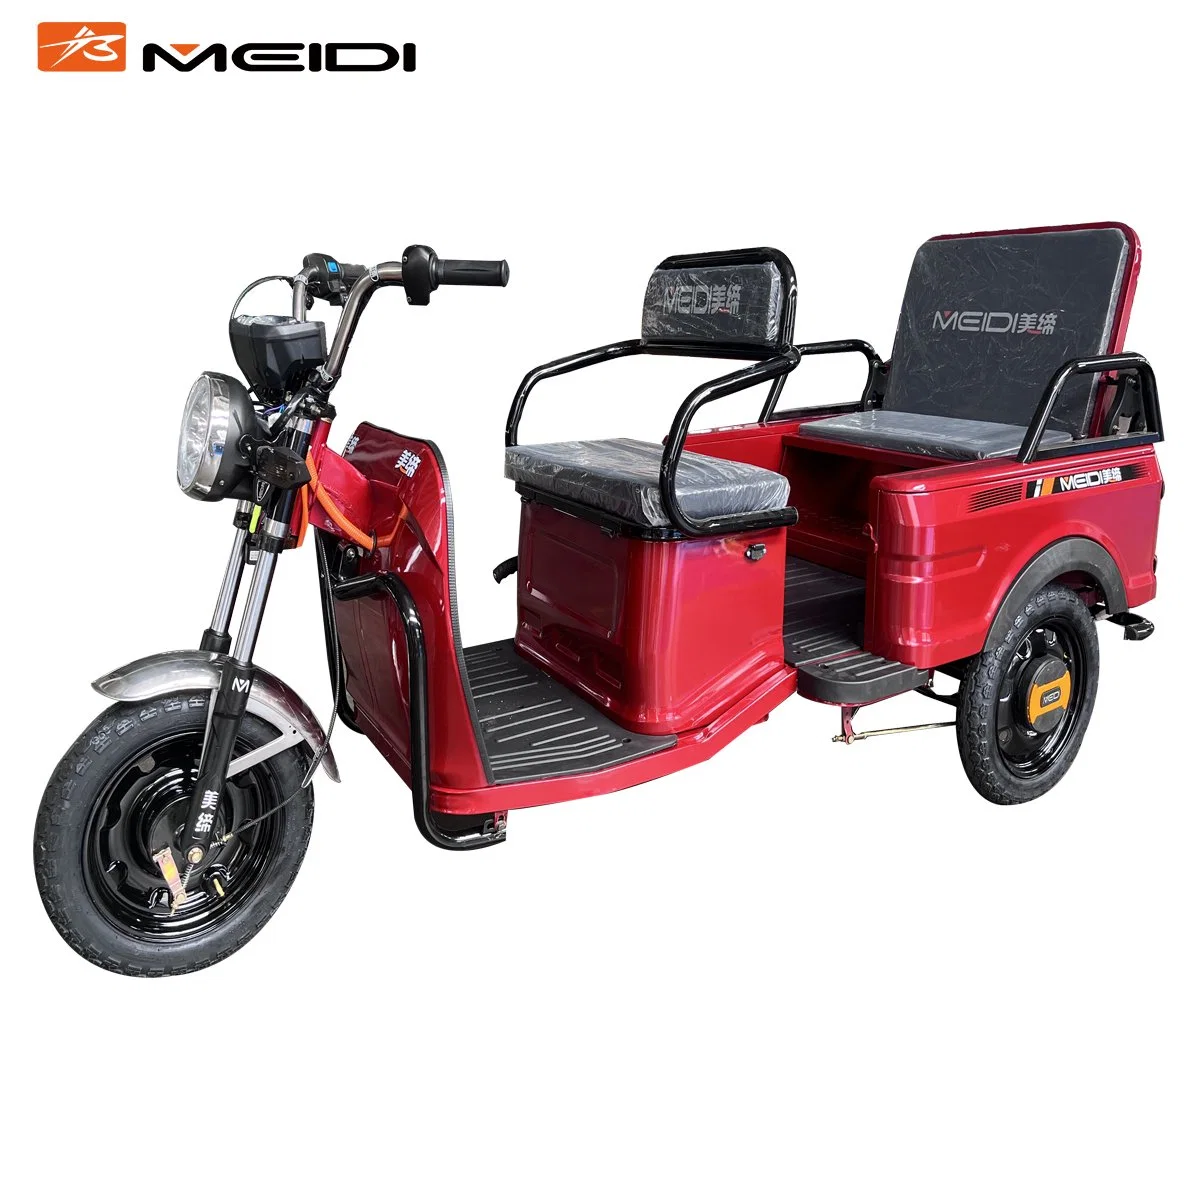 Best Price 3-Wheel E-Bike for Sale in The Philippines